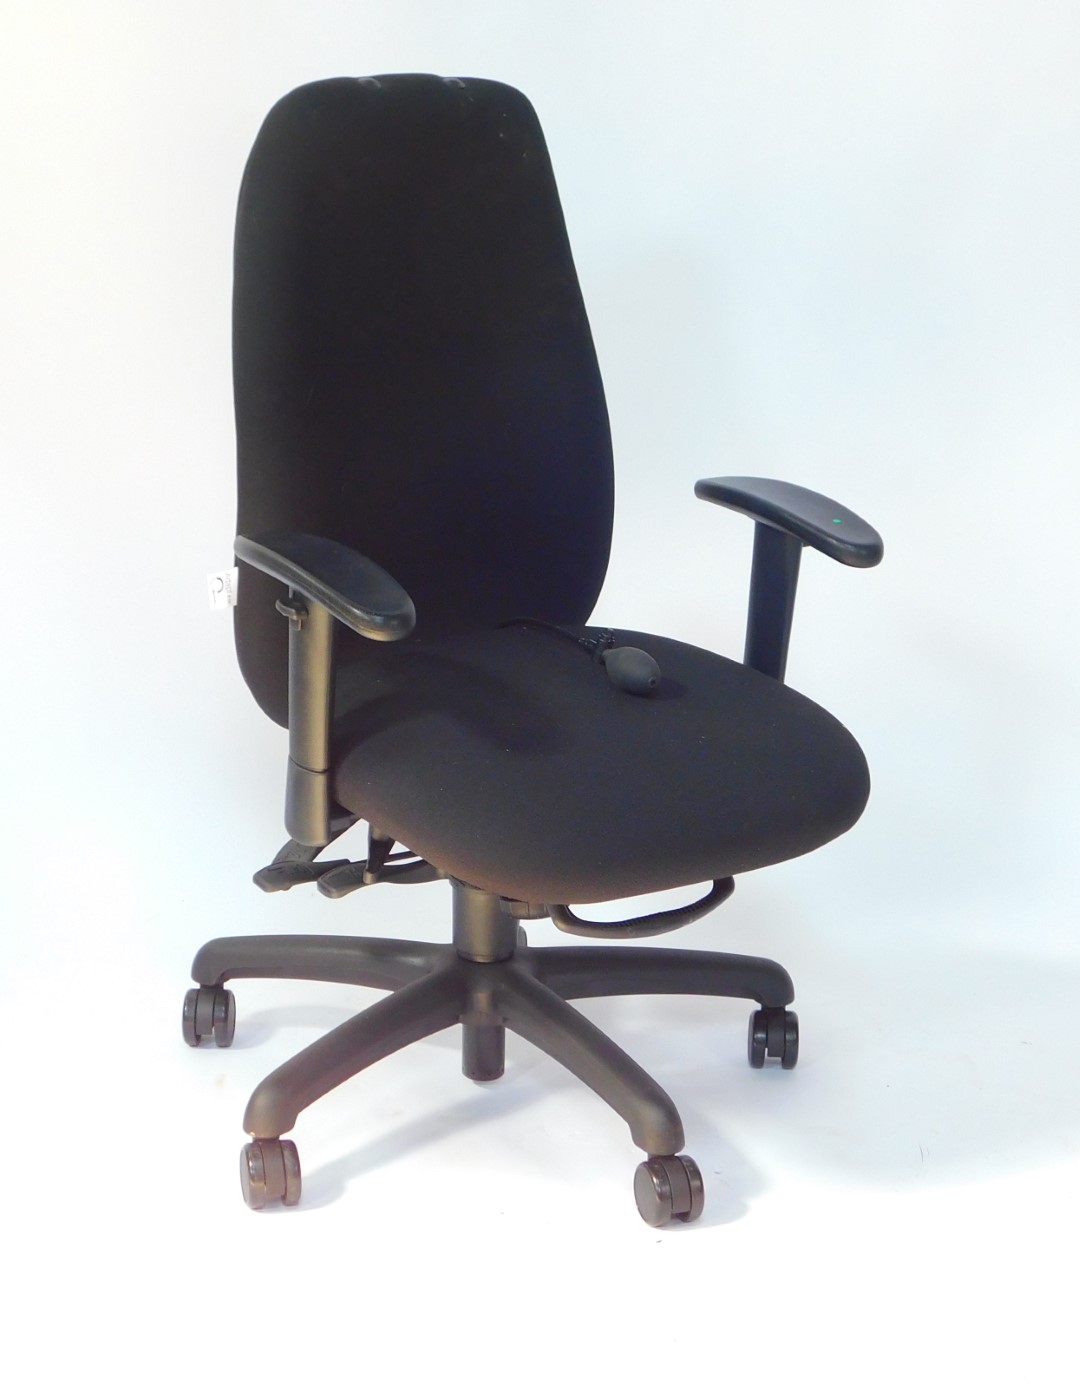 A Gochair Adapt office chair, with pump action, adjustable seat and back, raised on a five leg